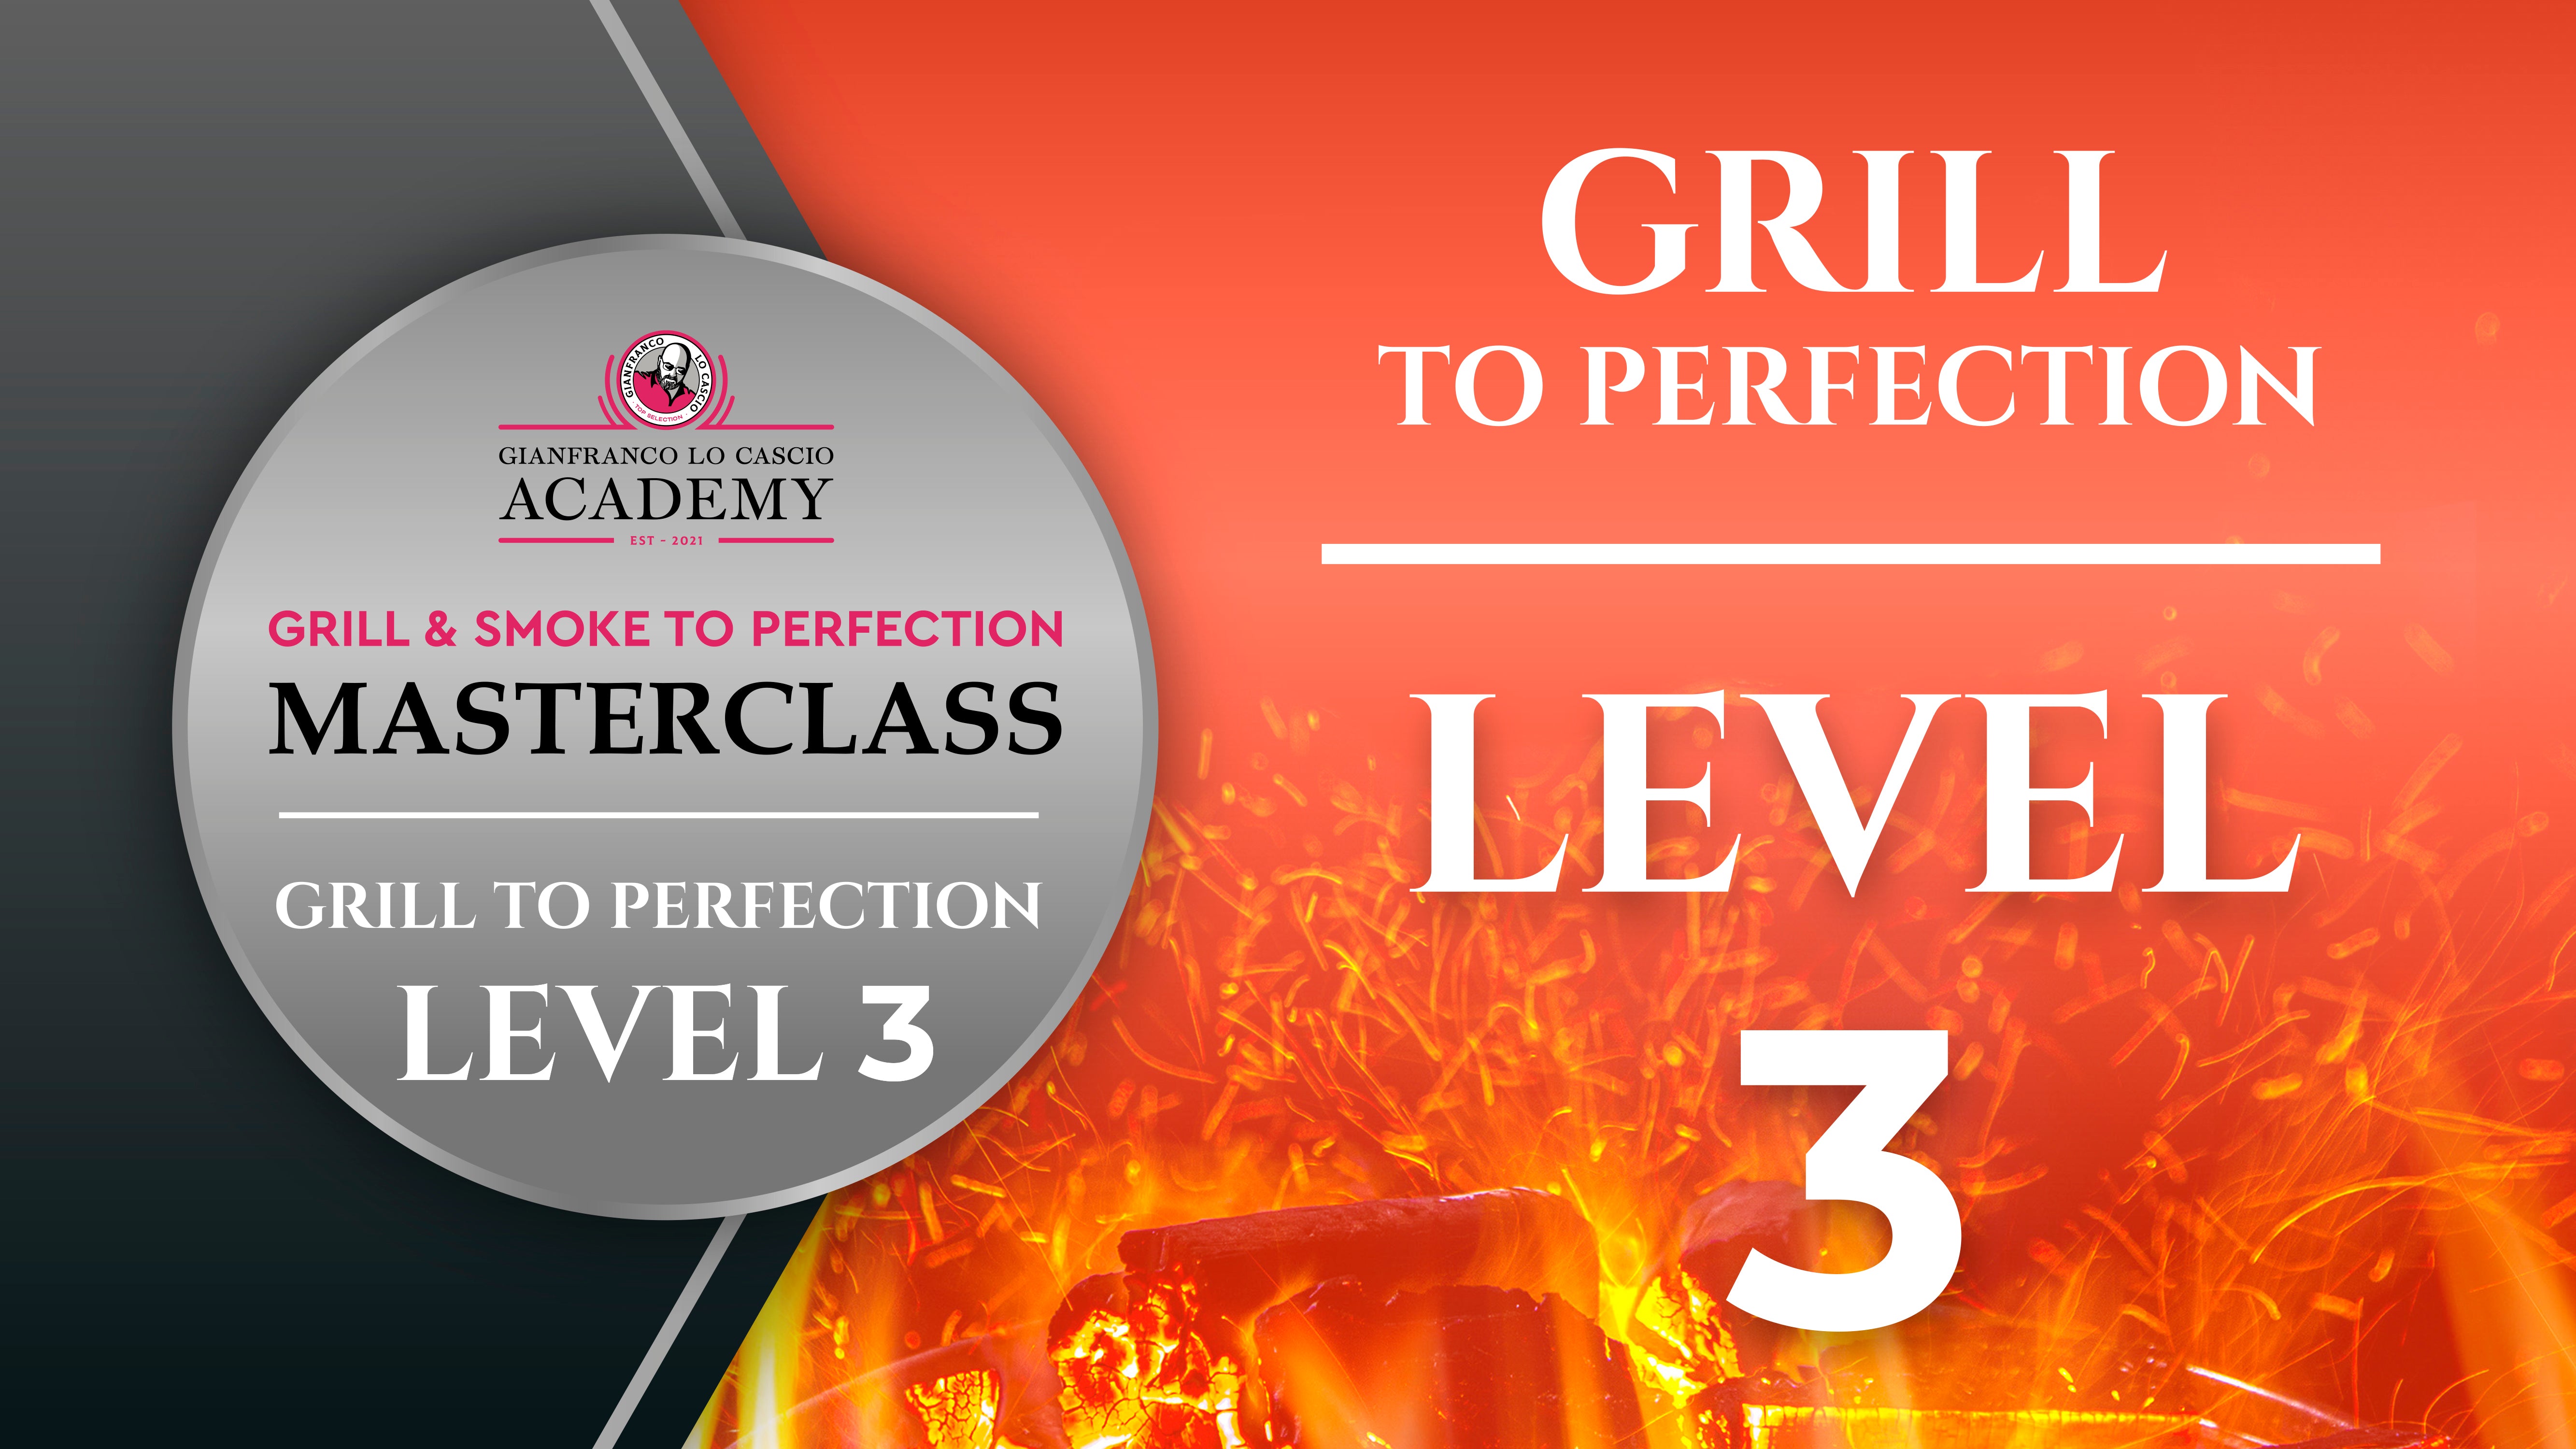 Grill to Perfection - Level 3 - Video Masterclass GLC Academy